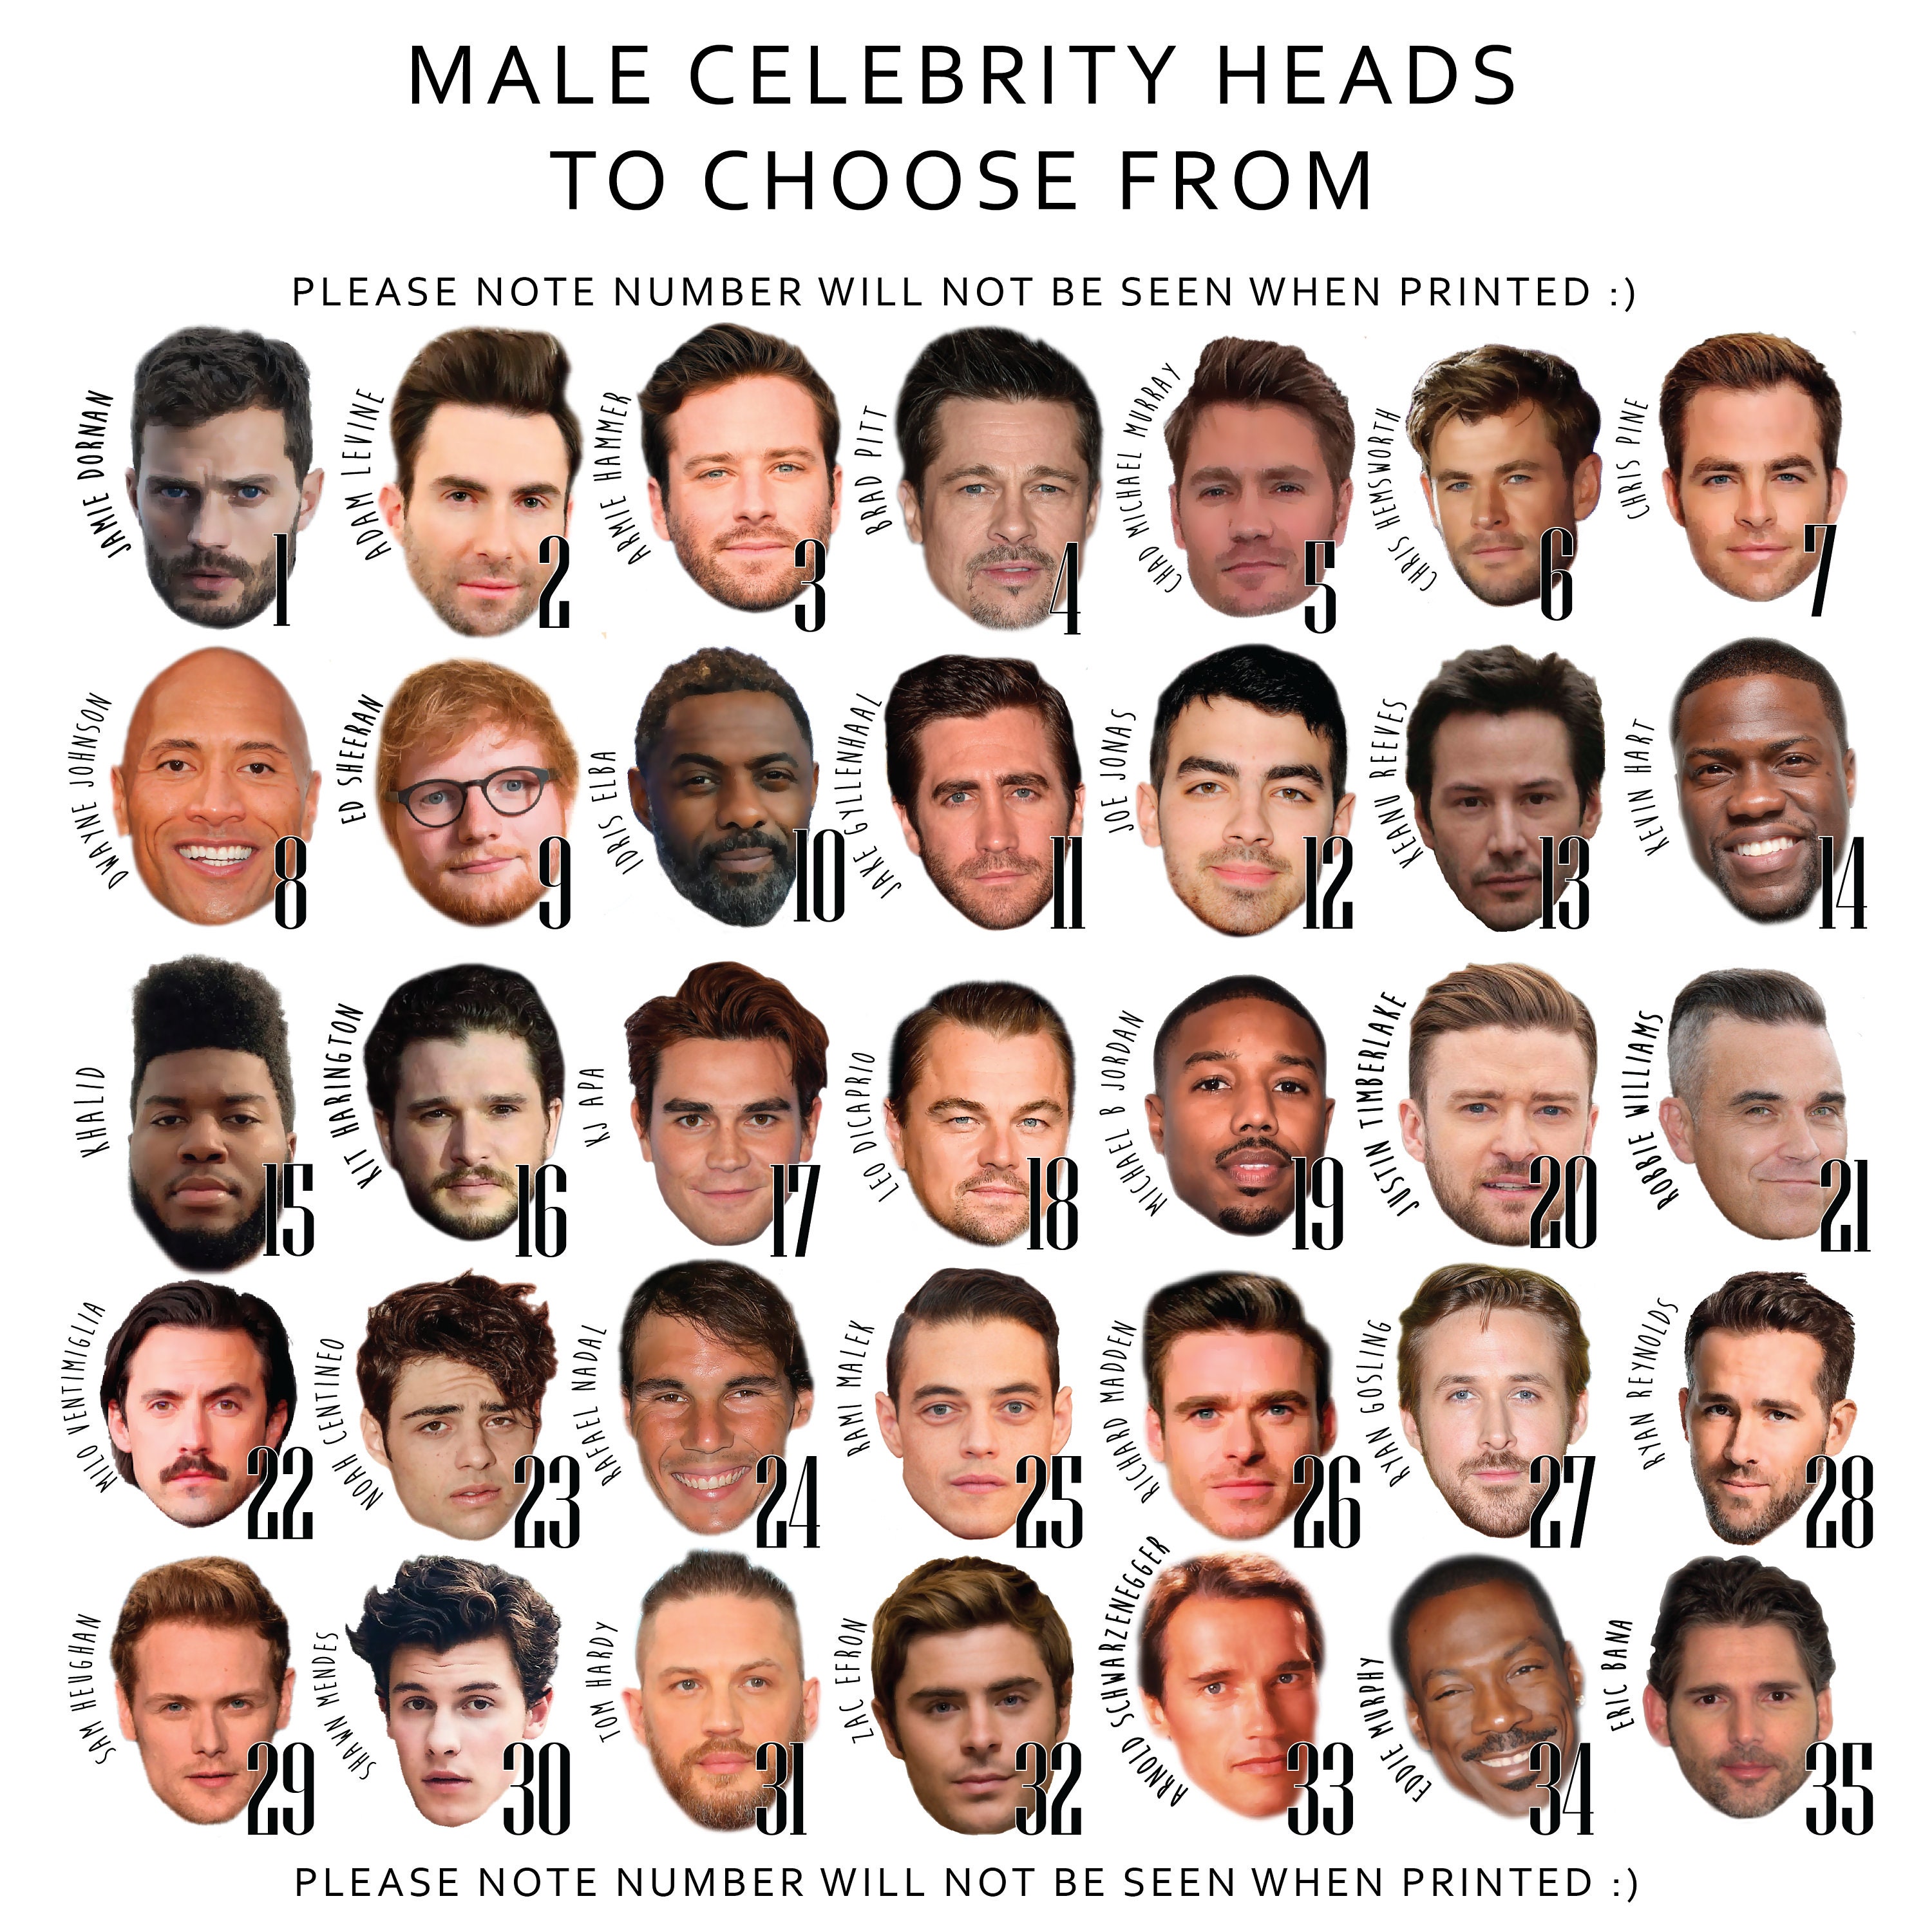 celebrity-heads-game-v2-who-has-the-groom-scratch-to-etsy